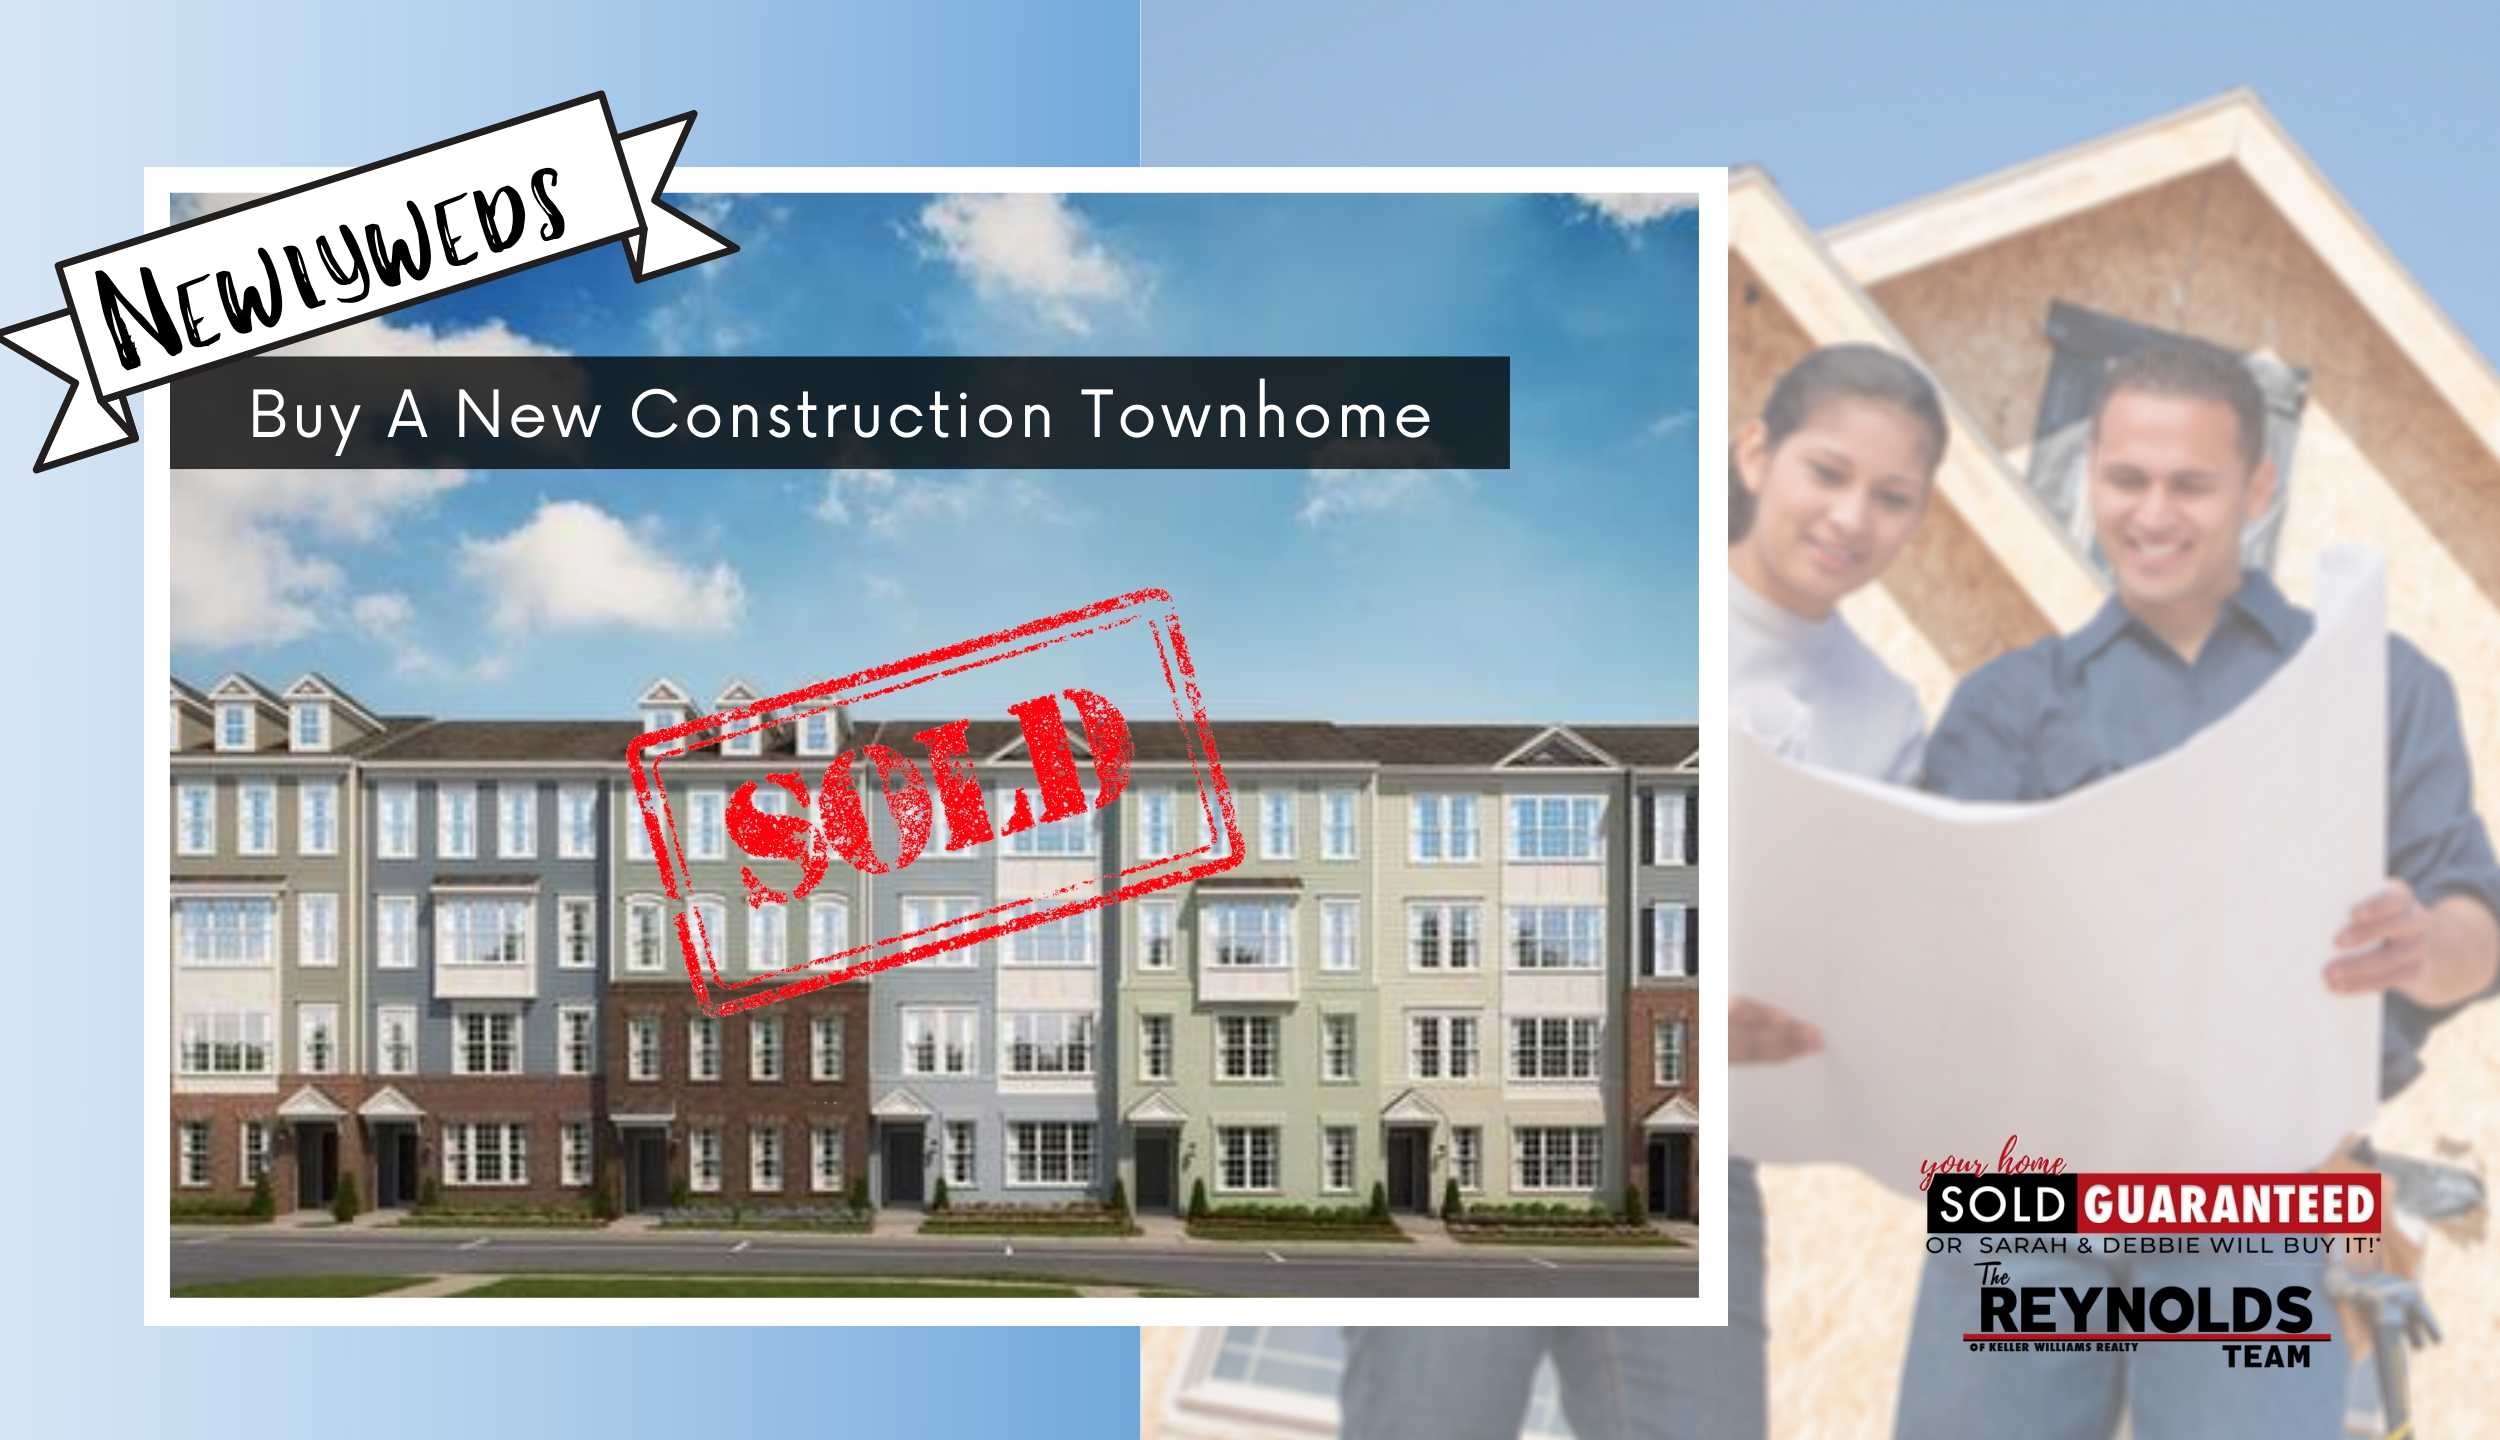 Newlyweds Buy a New Construction Townhome!